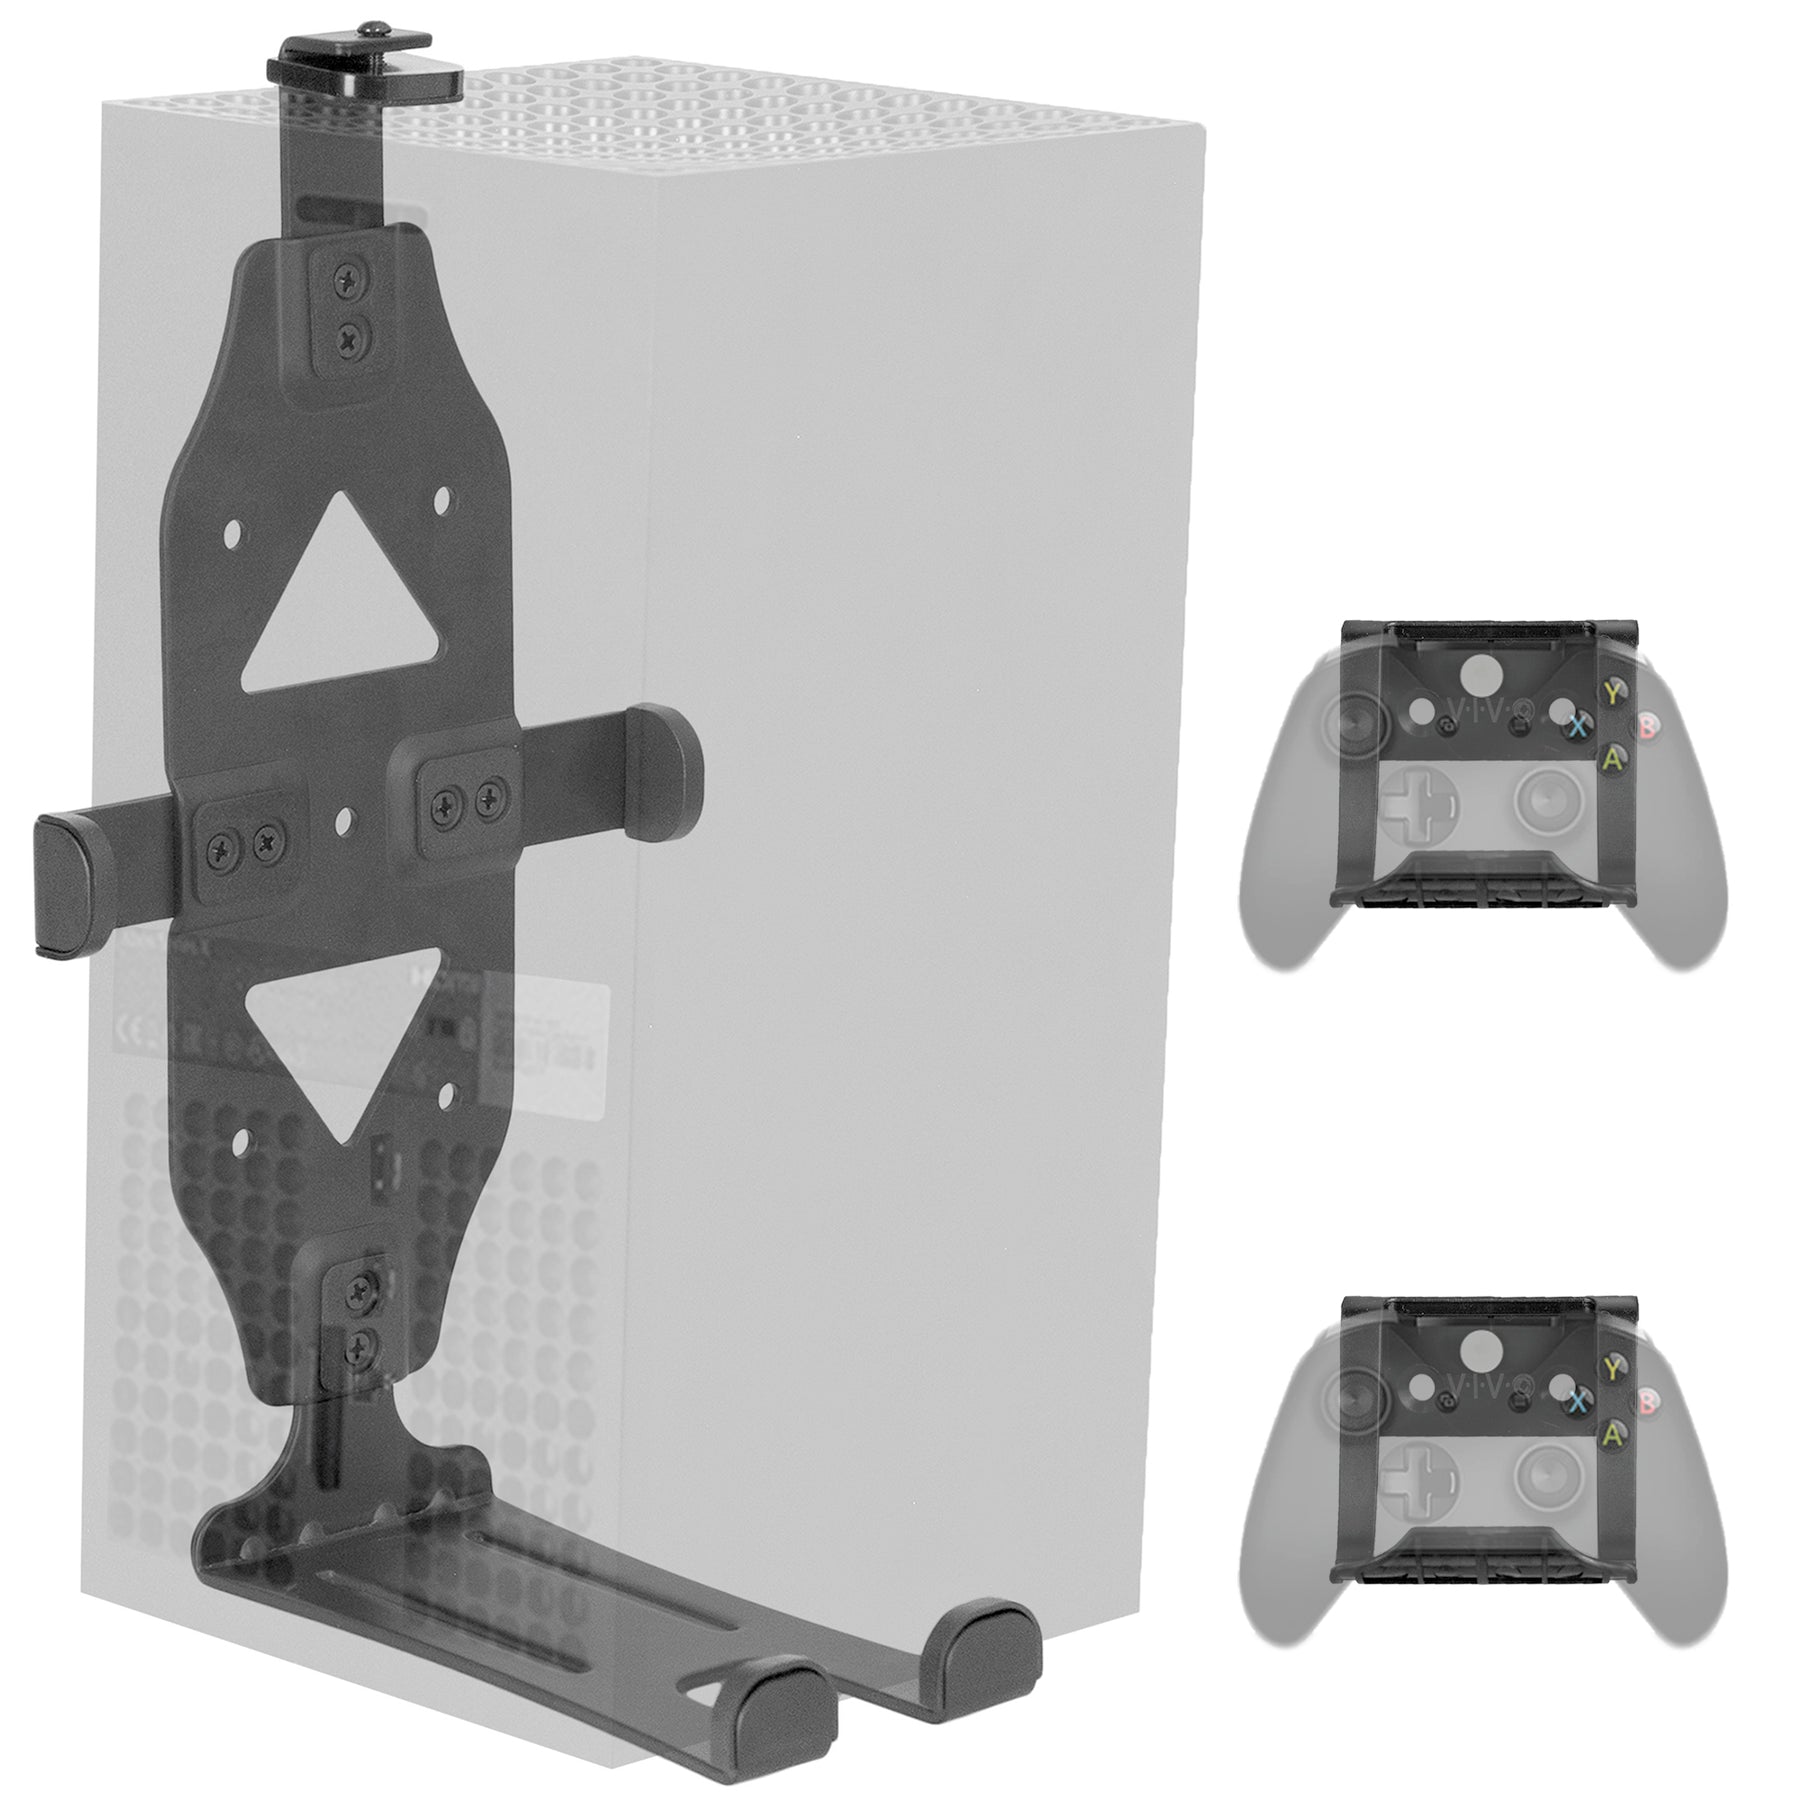 TotalMount – Wall Mount for Xbox Series X – Prevents Your Xbox